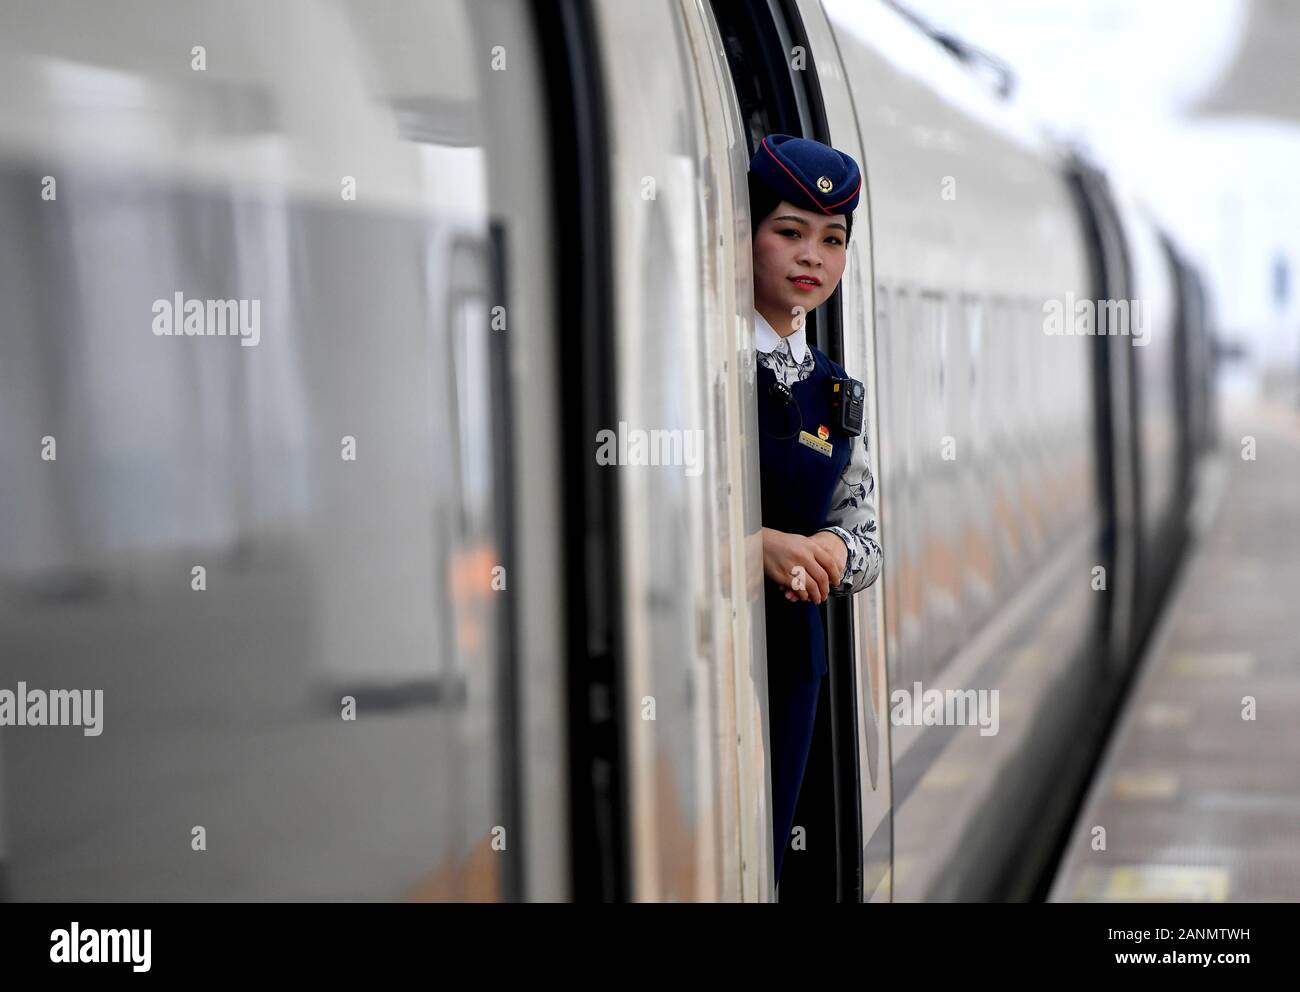 (200118) -- ZHENGZHOU, Jan. 18, 2020 (Xinhua) -- Jiang Yuanyue checks the platform for passengers boarding train G3105, Jan. 17, 2020. Jiang Yuanyuan, an attendant born in the new millenium, is getting ready for her first Spring Festival travel rush work as an attendant.   To be an attendant on a high-speed train has always been Jiang's dream. After making her debut in the job, she tried hard to keep up with the fast pace and learn to get along with various passengers. As she tried and persisted, Jiang has grown into a professional and proficient attendant.    As the job requires Jiang to work Stock Photo